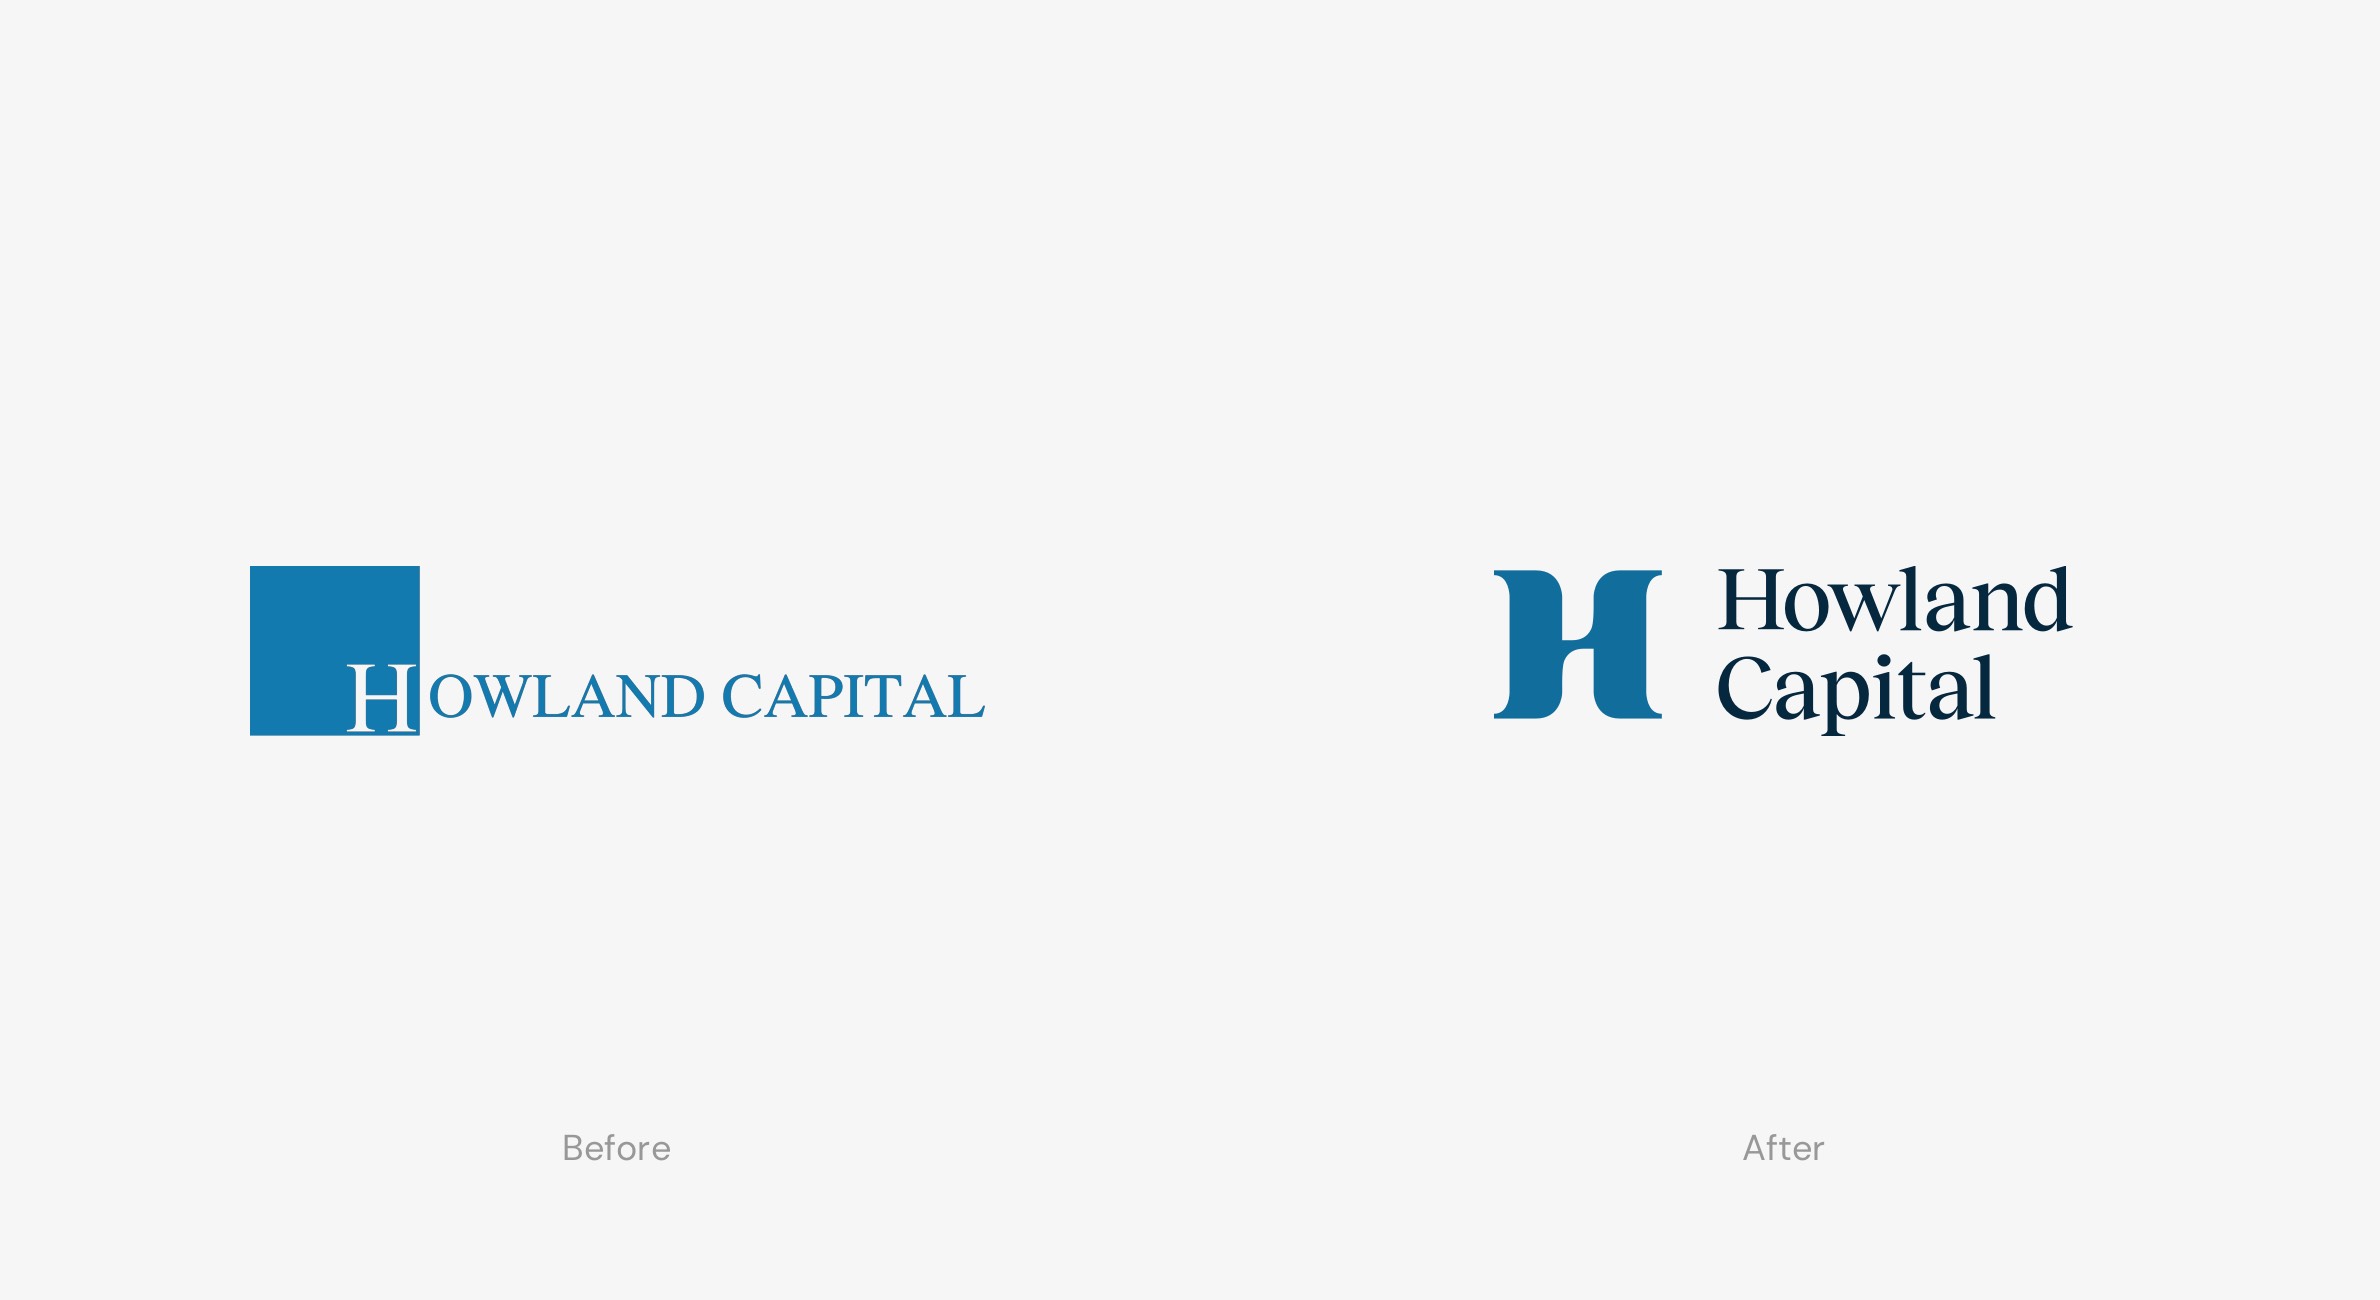 Howland Capital logo before and after